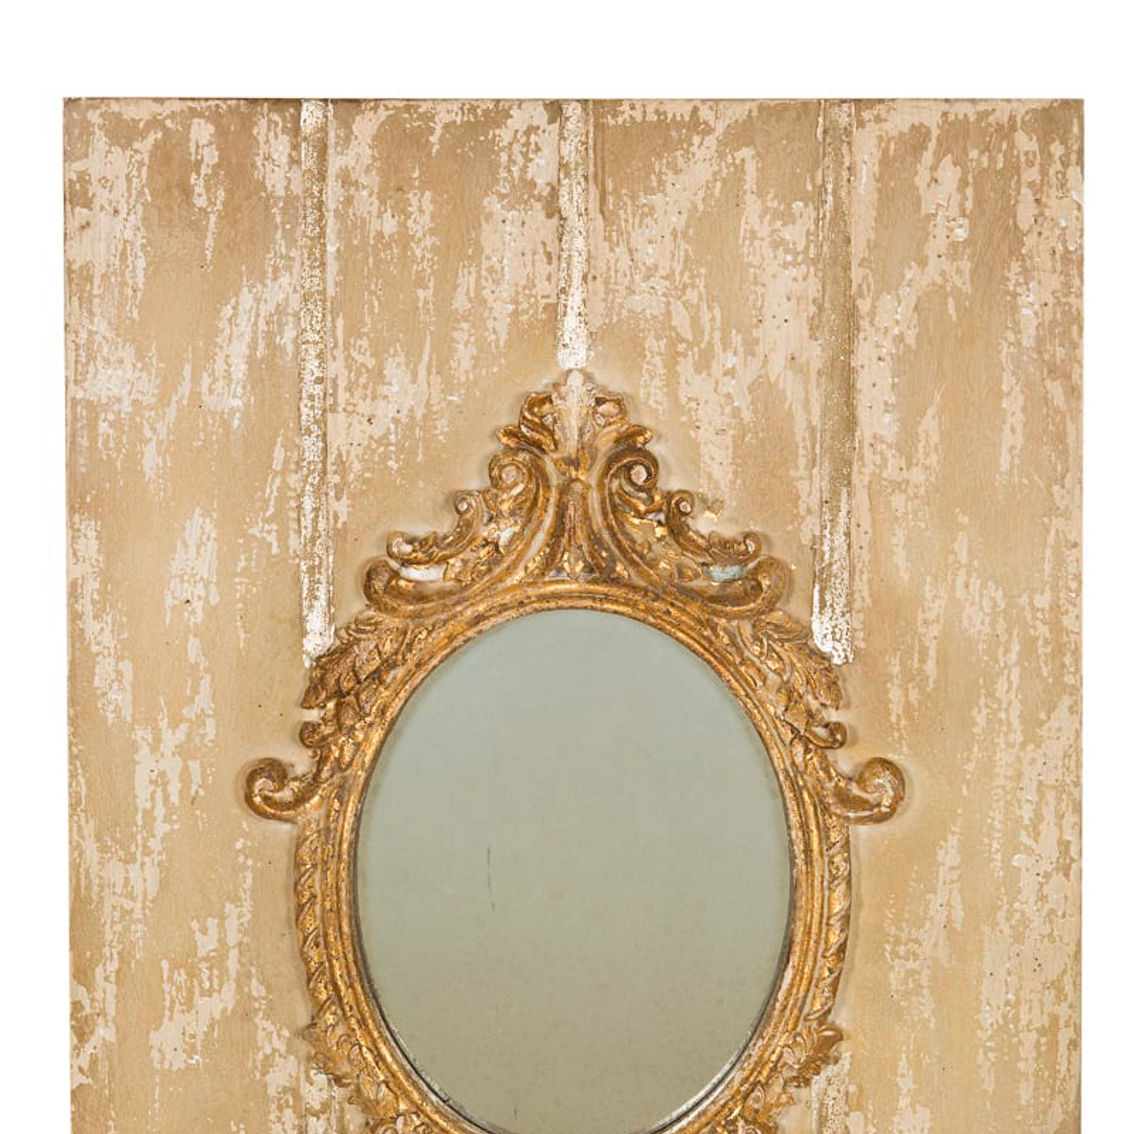 Manor Luxe Somerset Baroque Wood Board & Antiqued Glass Wall Mirror 24''L x 36''H - Image 2 of 2